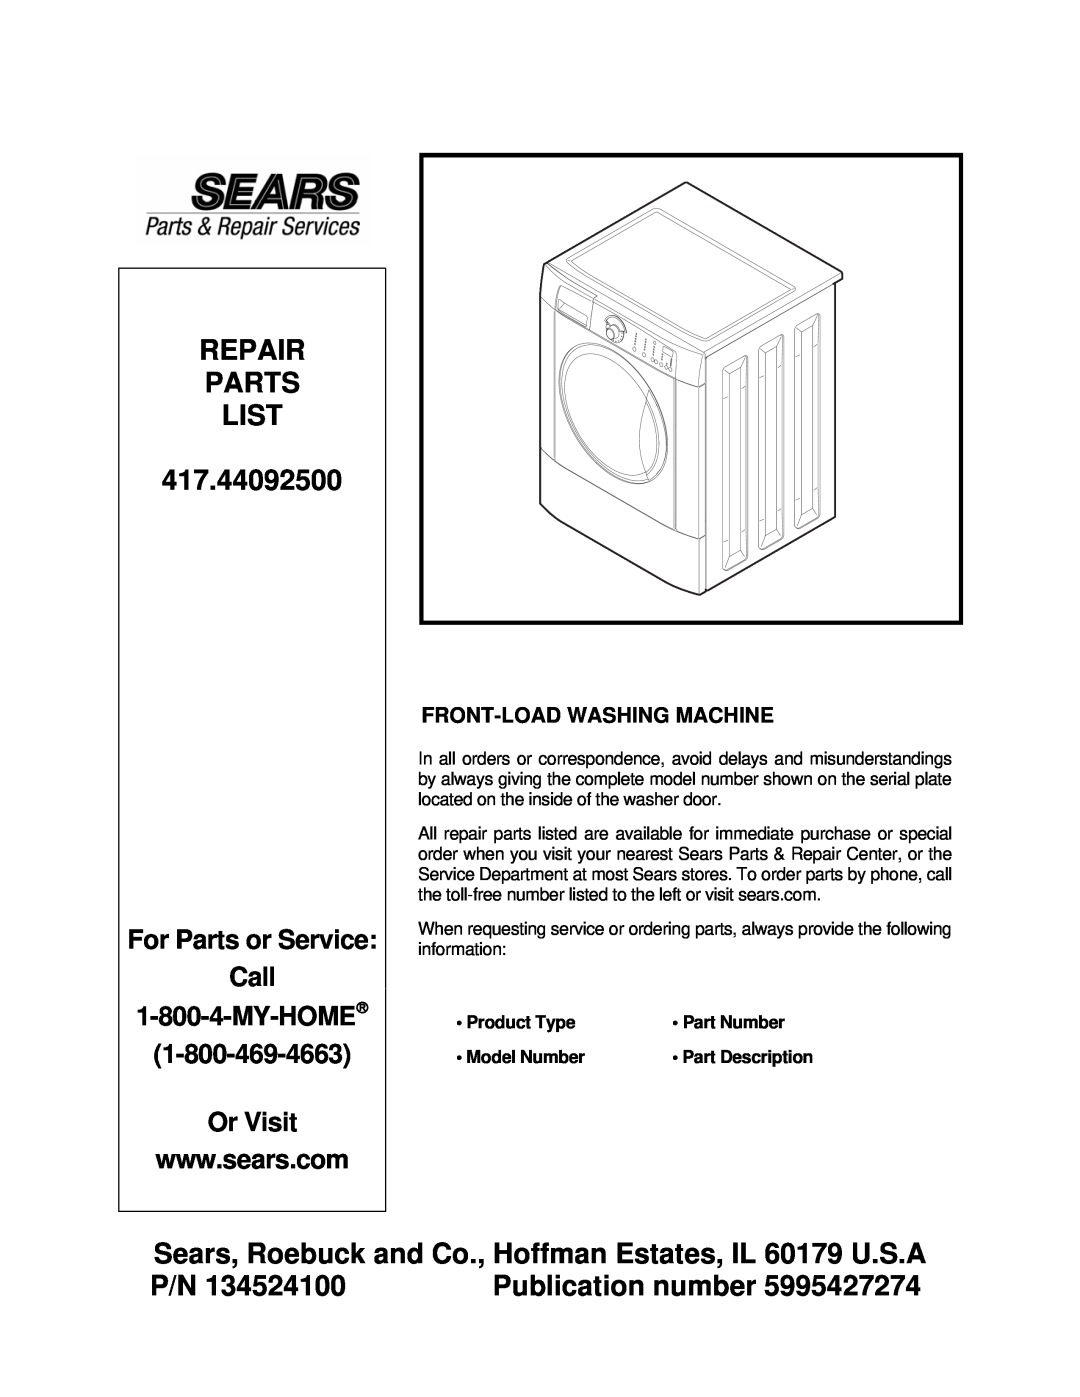 Sears P12T0084 manual REPAIR PARTS LIST 417.44092500, Sears, Roebuck and Co., Hoffman Estates, IL 60179 U.S.A, Or Visit 